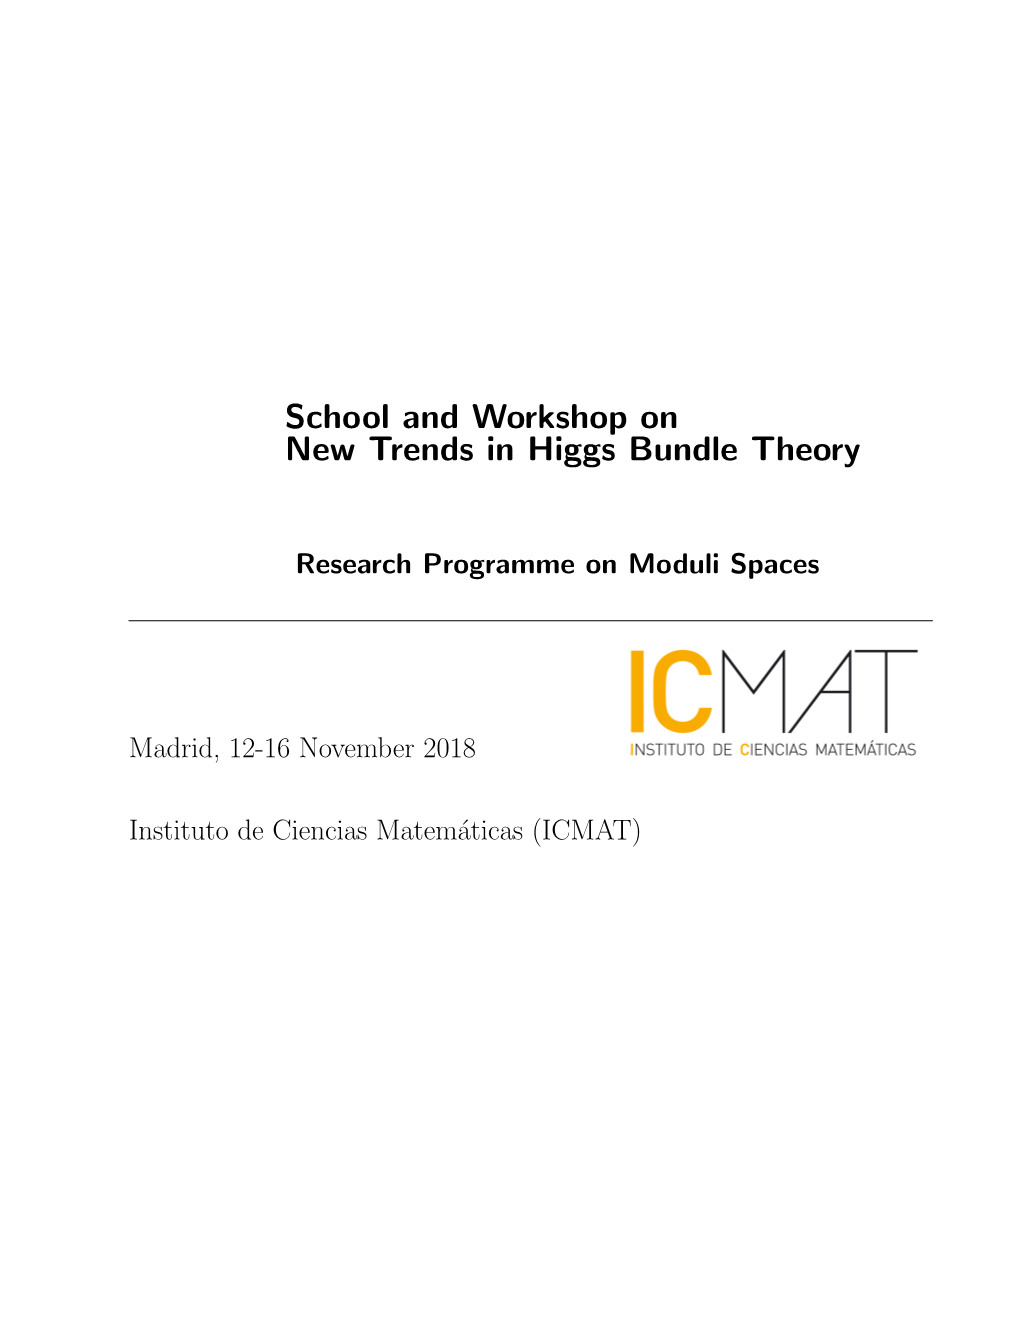 School and Workshop on New Trends in Higgs Bundle Theory